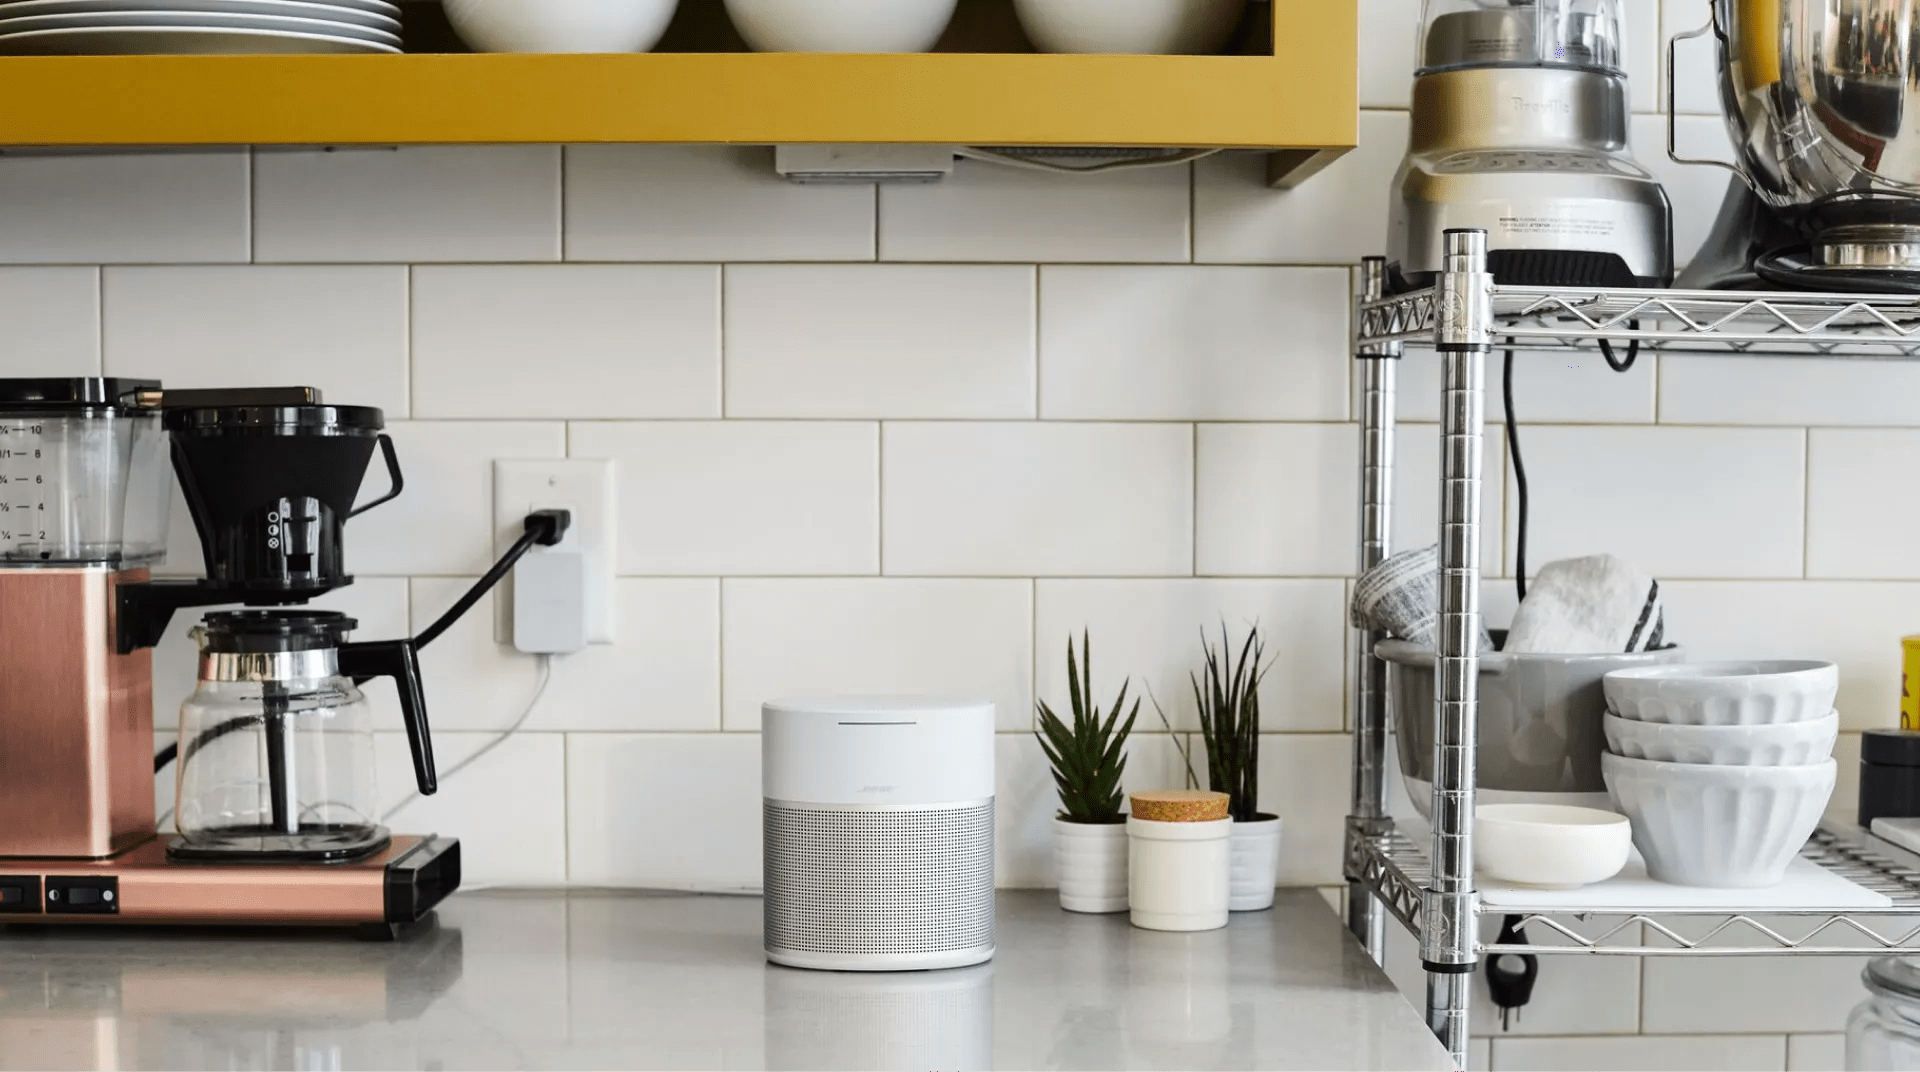 Bose Music Amplifier in kitchen setting